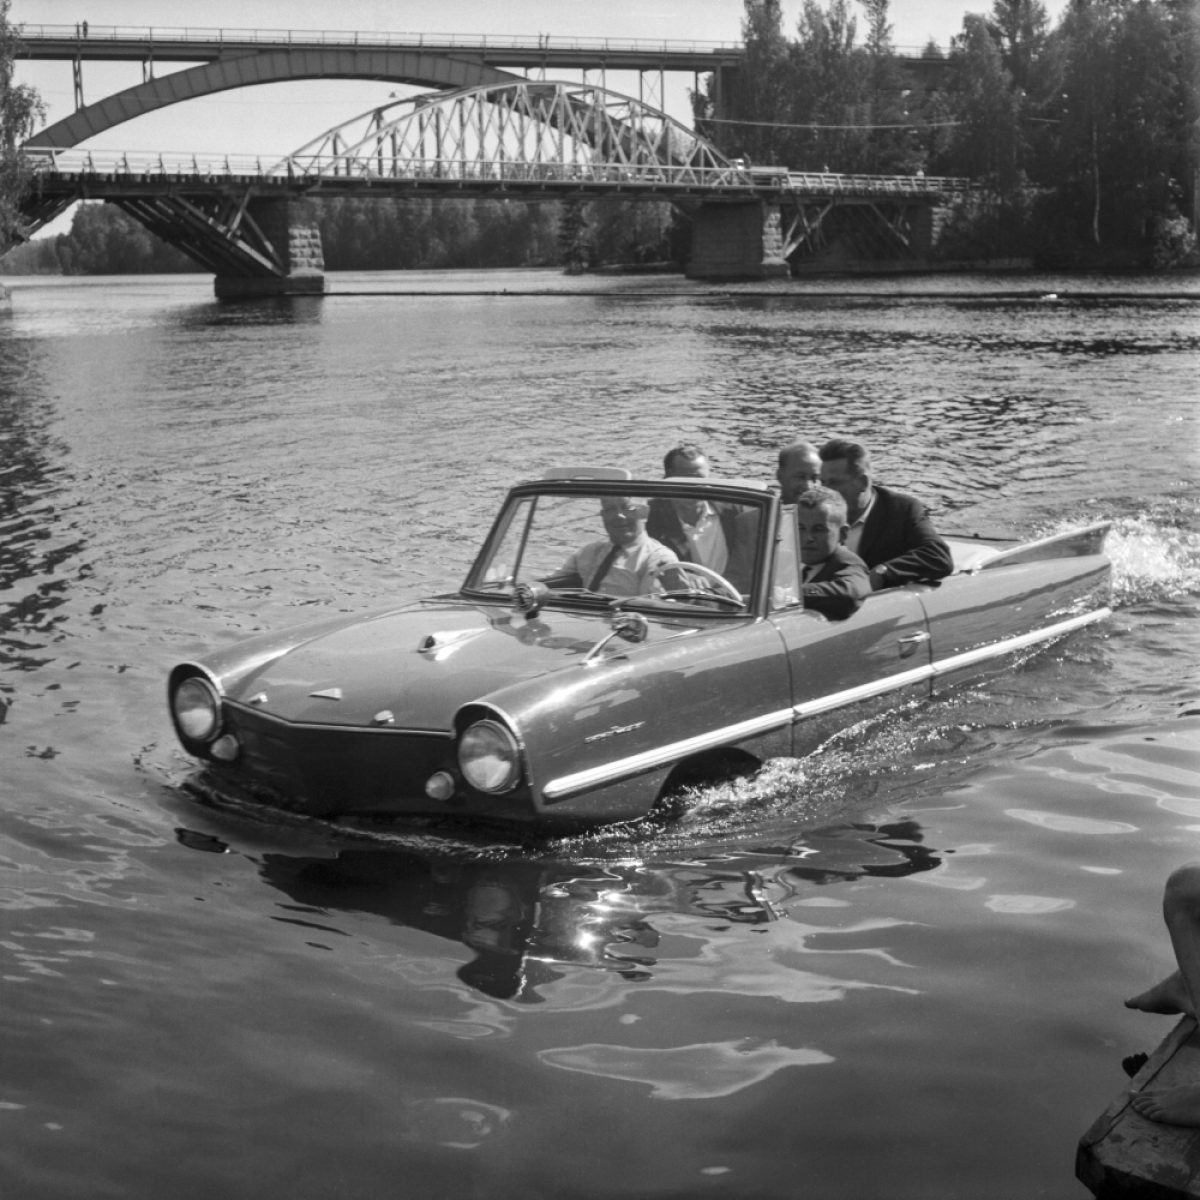 An amphibious car in the Jyränkö stream in Heinola on 6 July 1963. The Amphicar boasted a top speed of 14 km/h in water and 100 km/h on the road. The people on board remained perfectly dry. Photo: Itä-Häme / JOKA / Finnish Heritage Agency